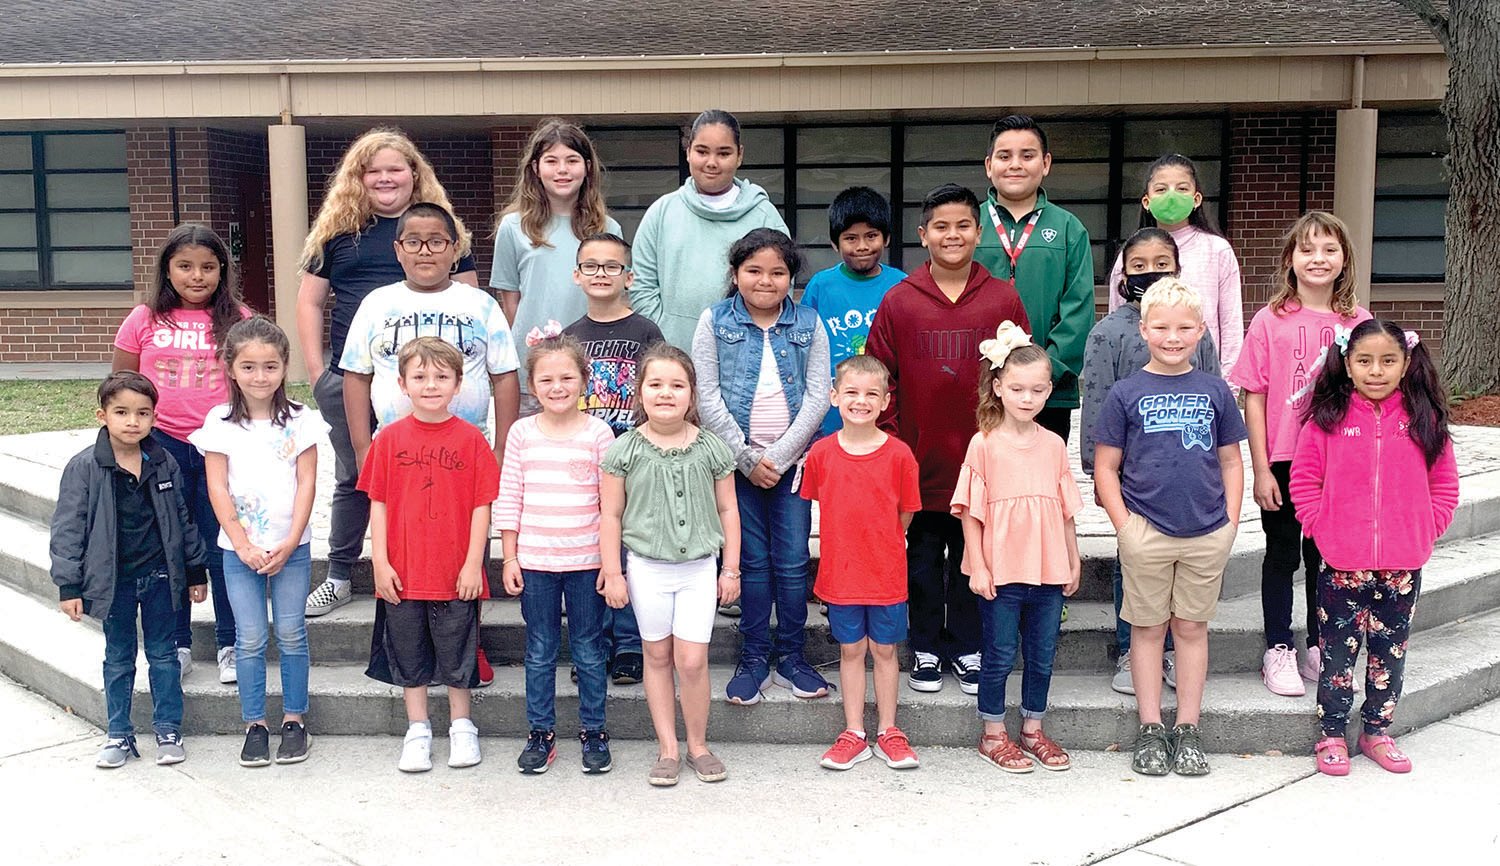 Pictured are the Students of the Week of Everglades Elementary School.